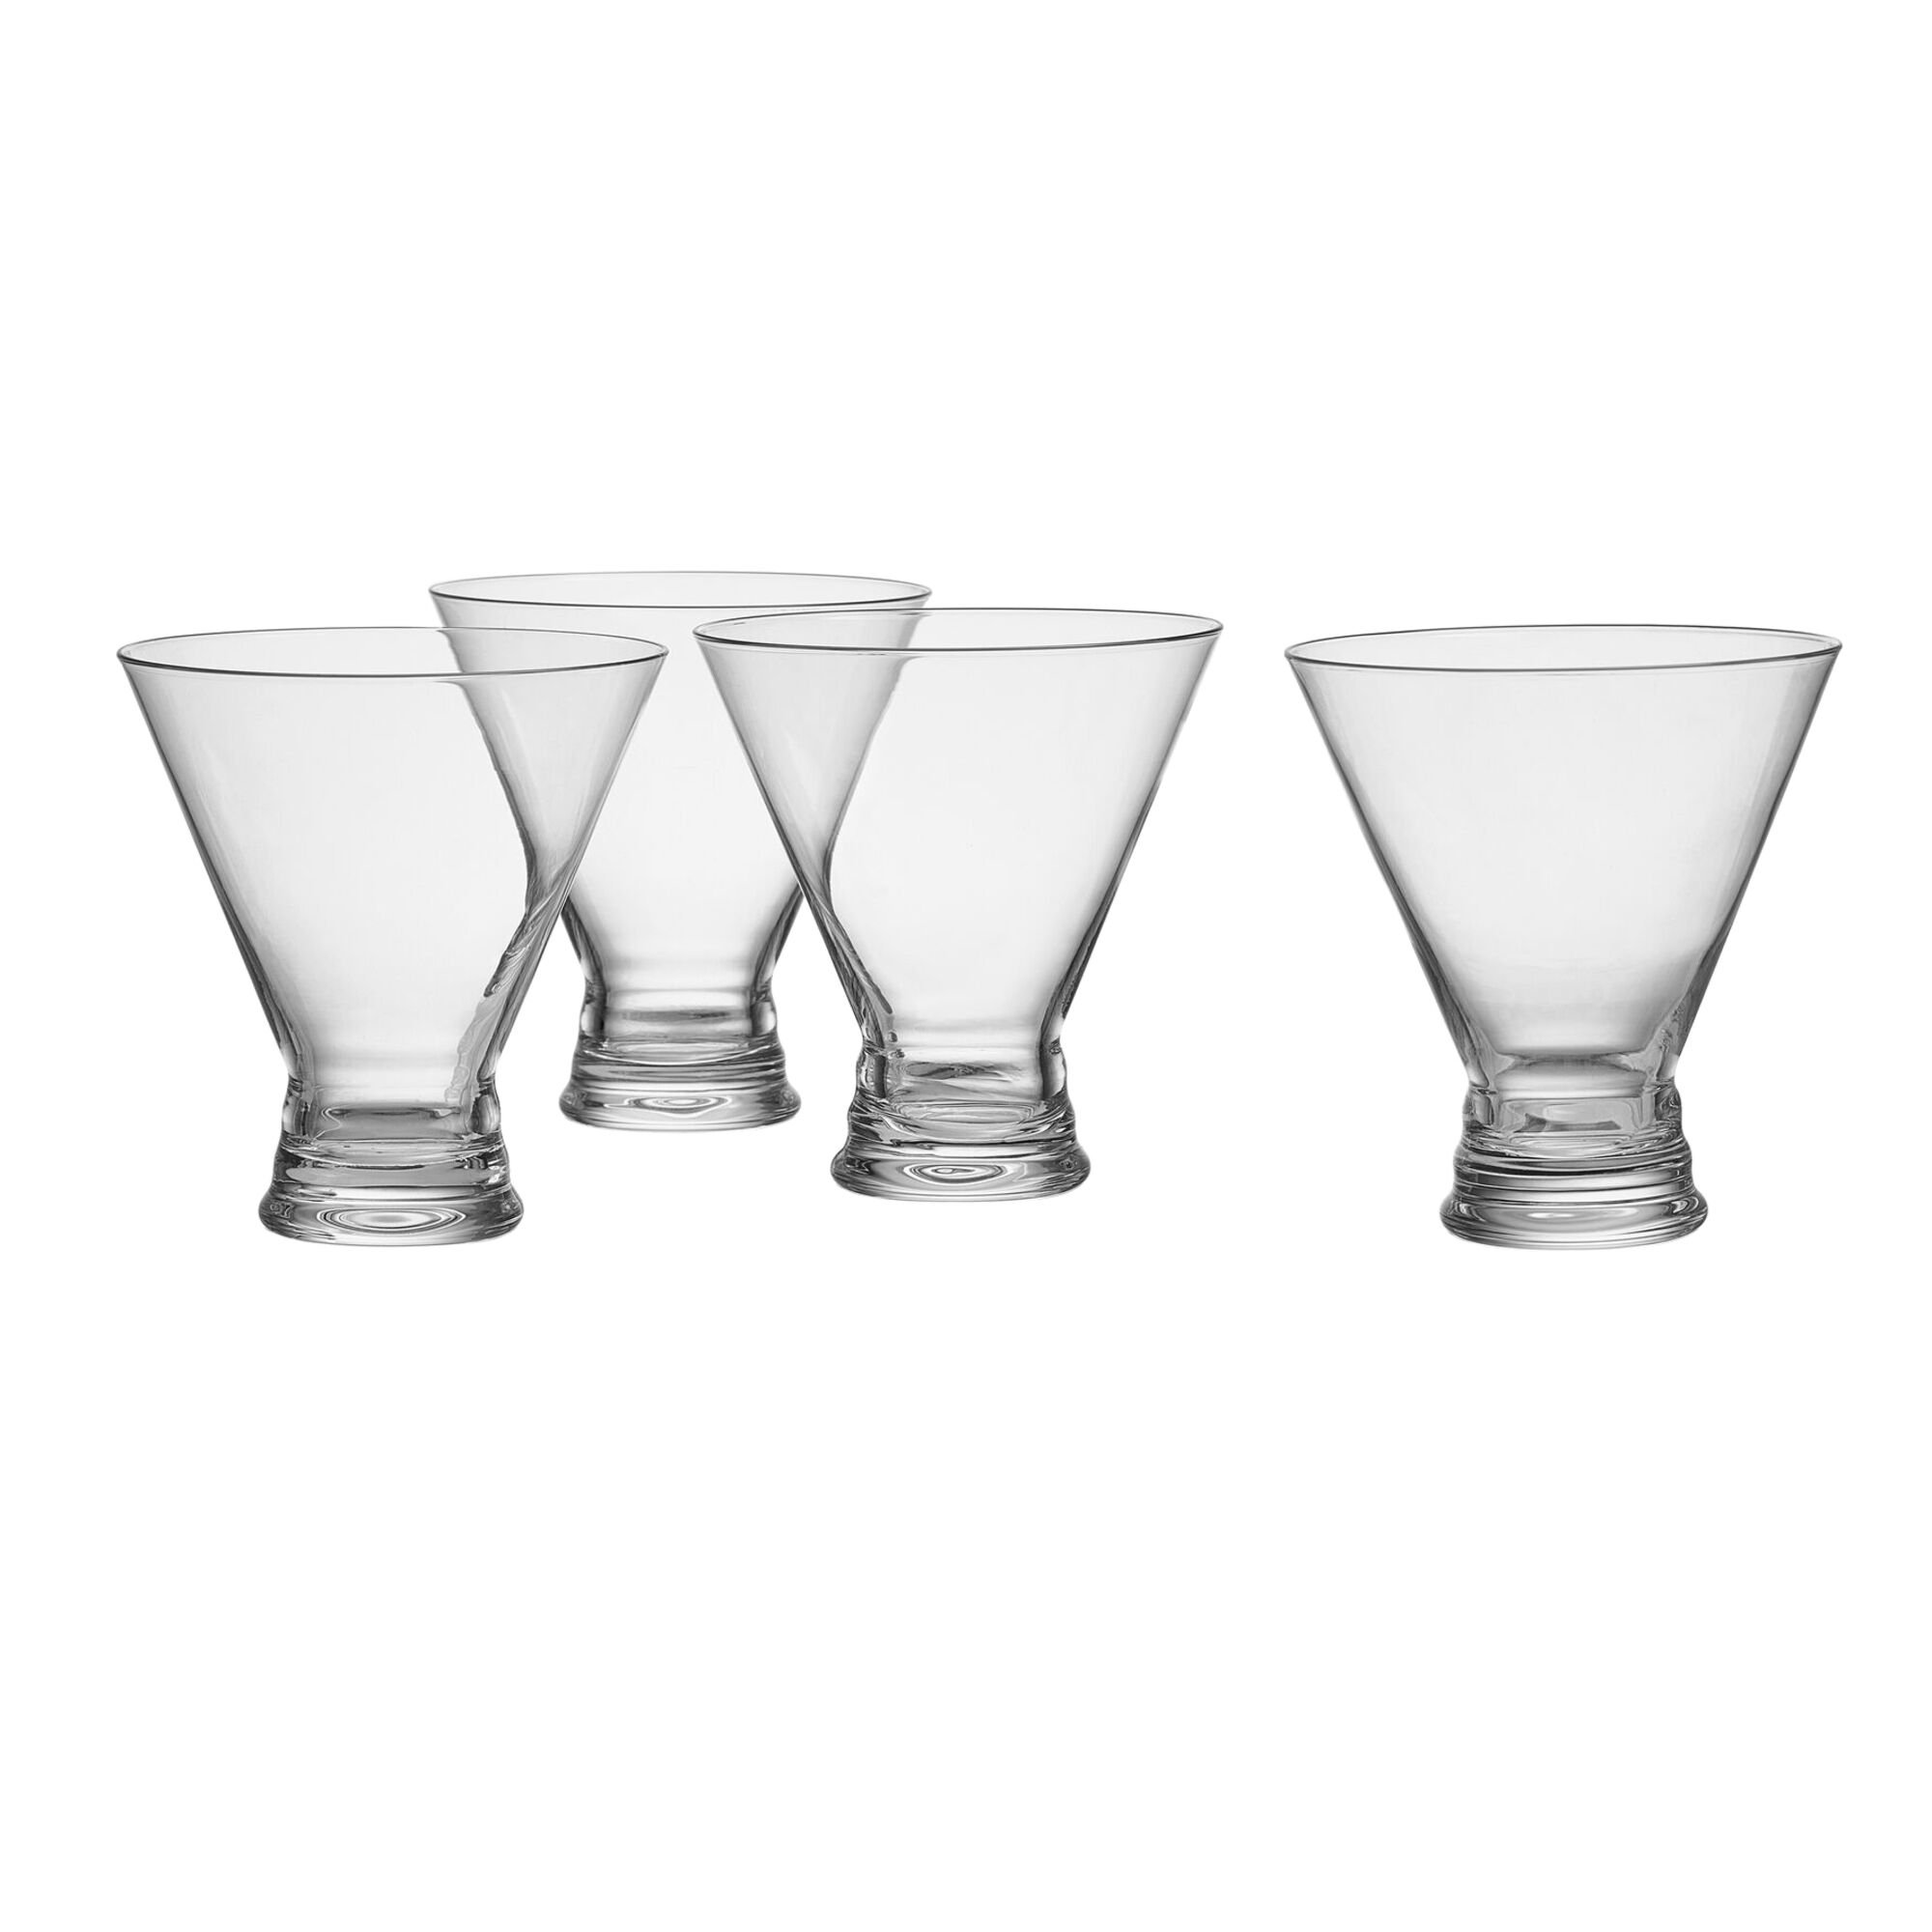 Unique Handcrafted Martini Glasses with Multicolored Twisted Stems,  8-Ounce, Set of 4